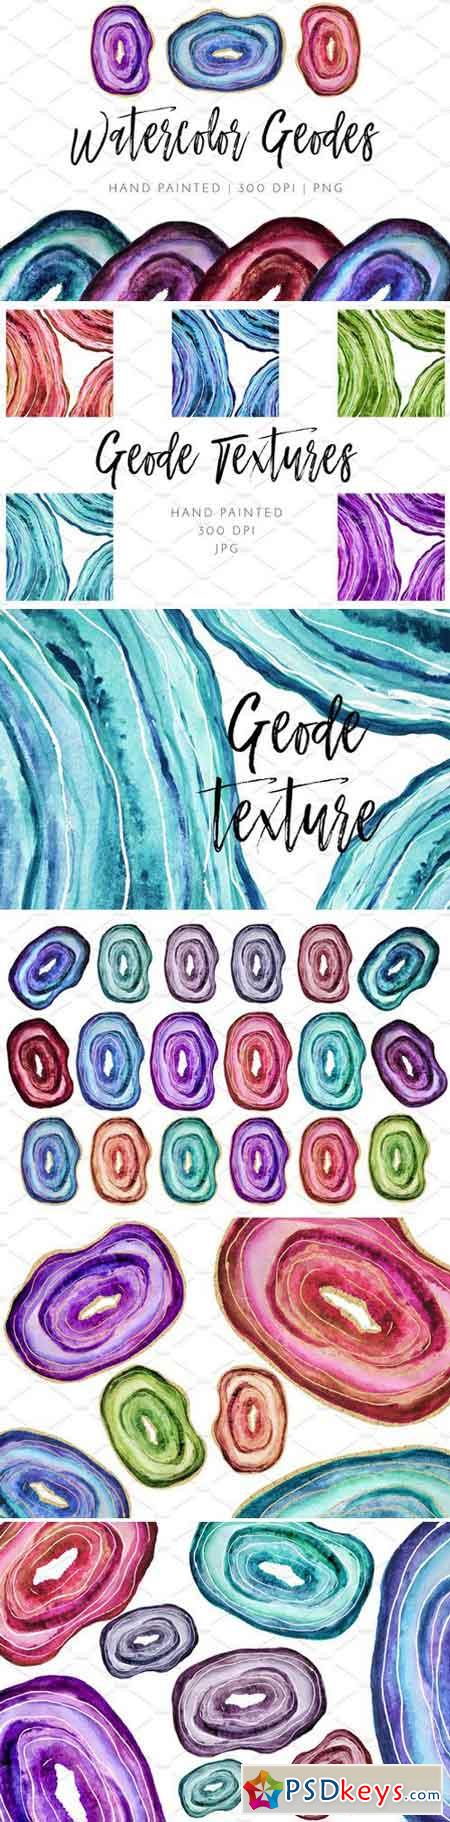 Hand Painted Watercolor Geode Agate 2176458